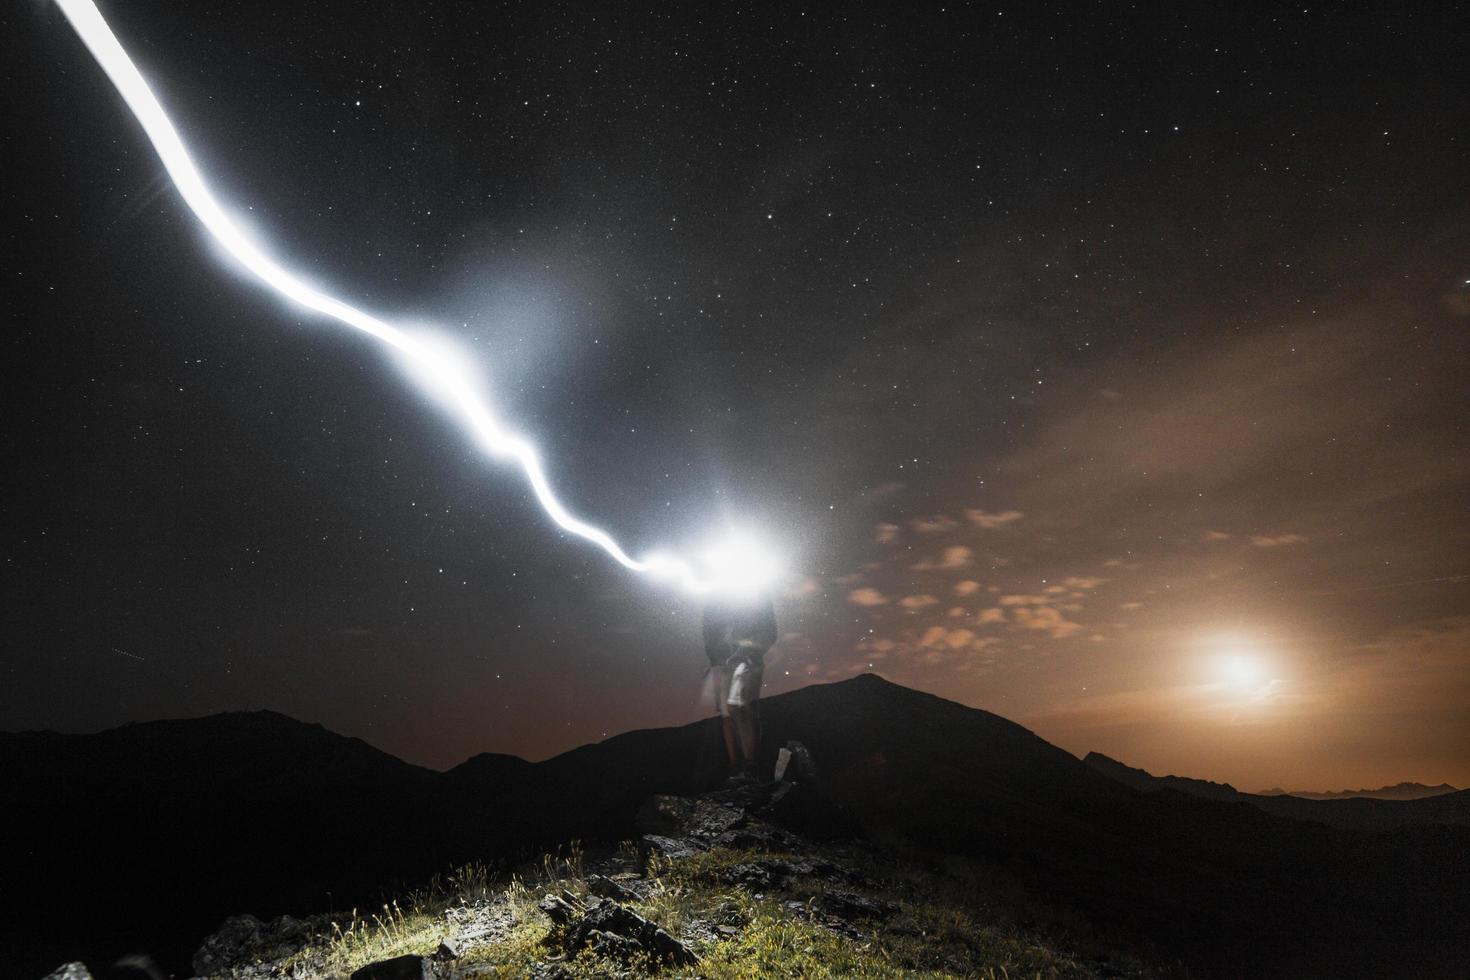 Man standing on a cliff at night photo